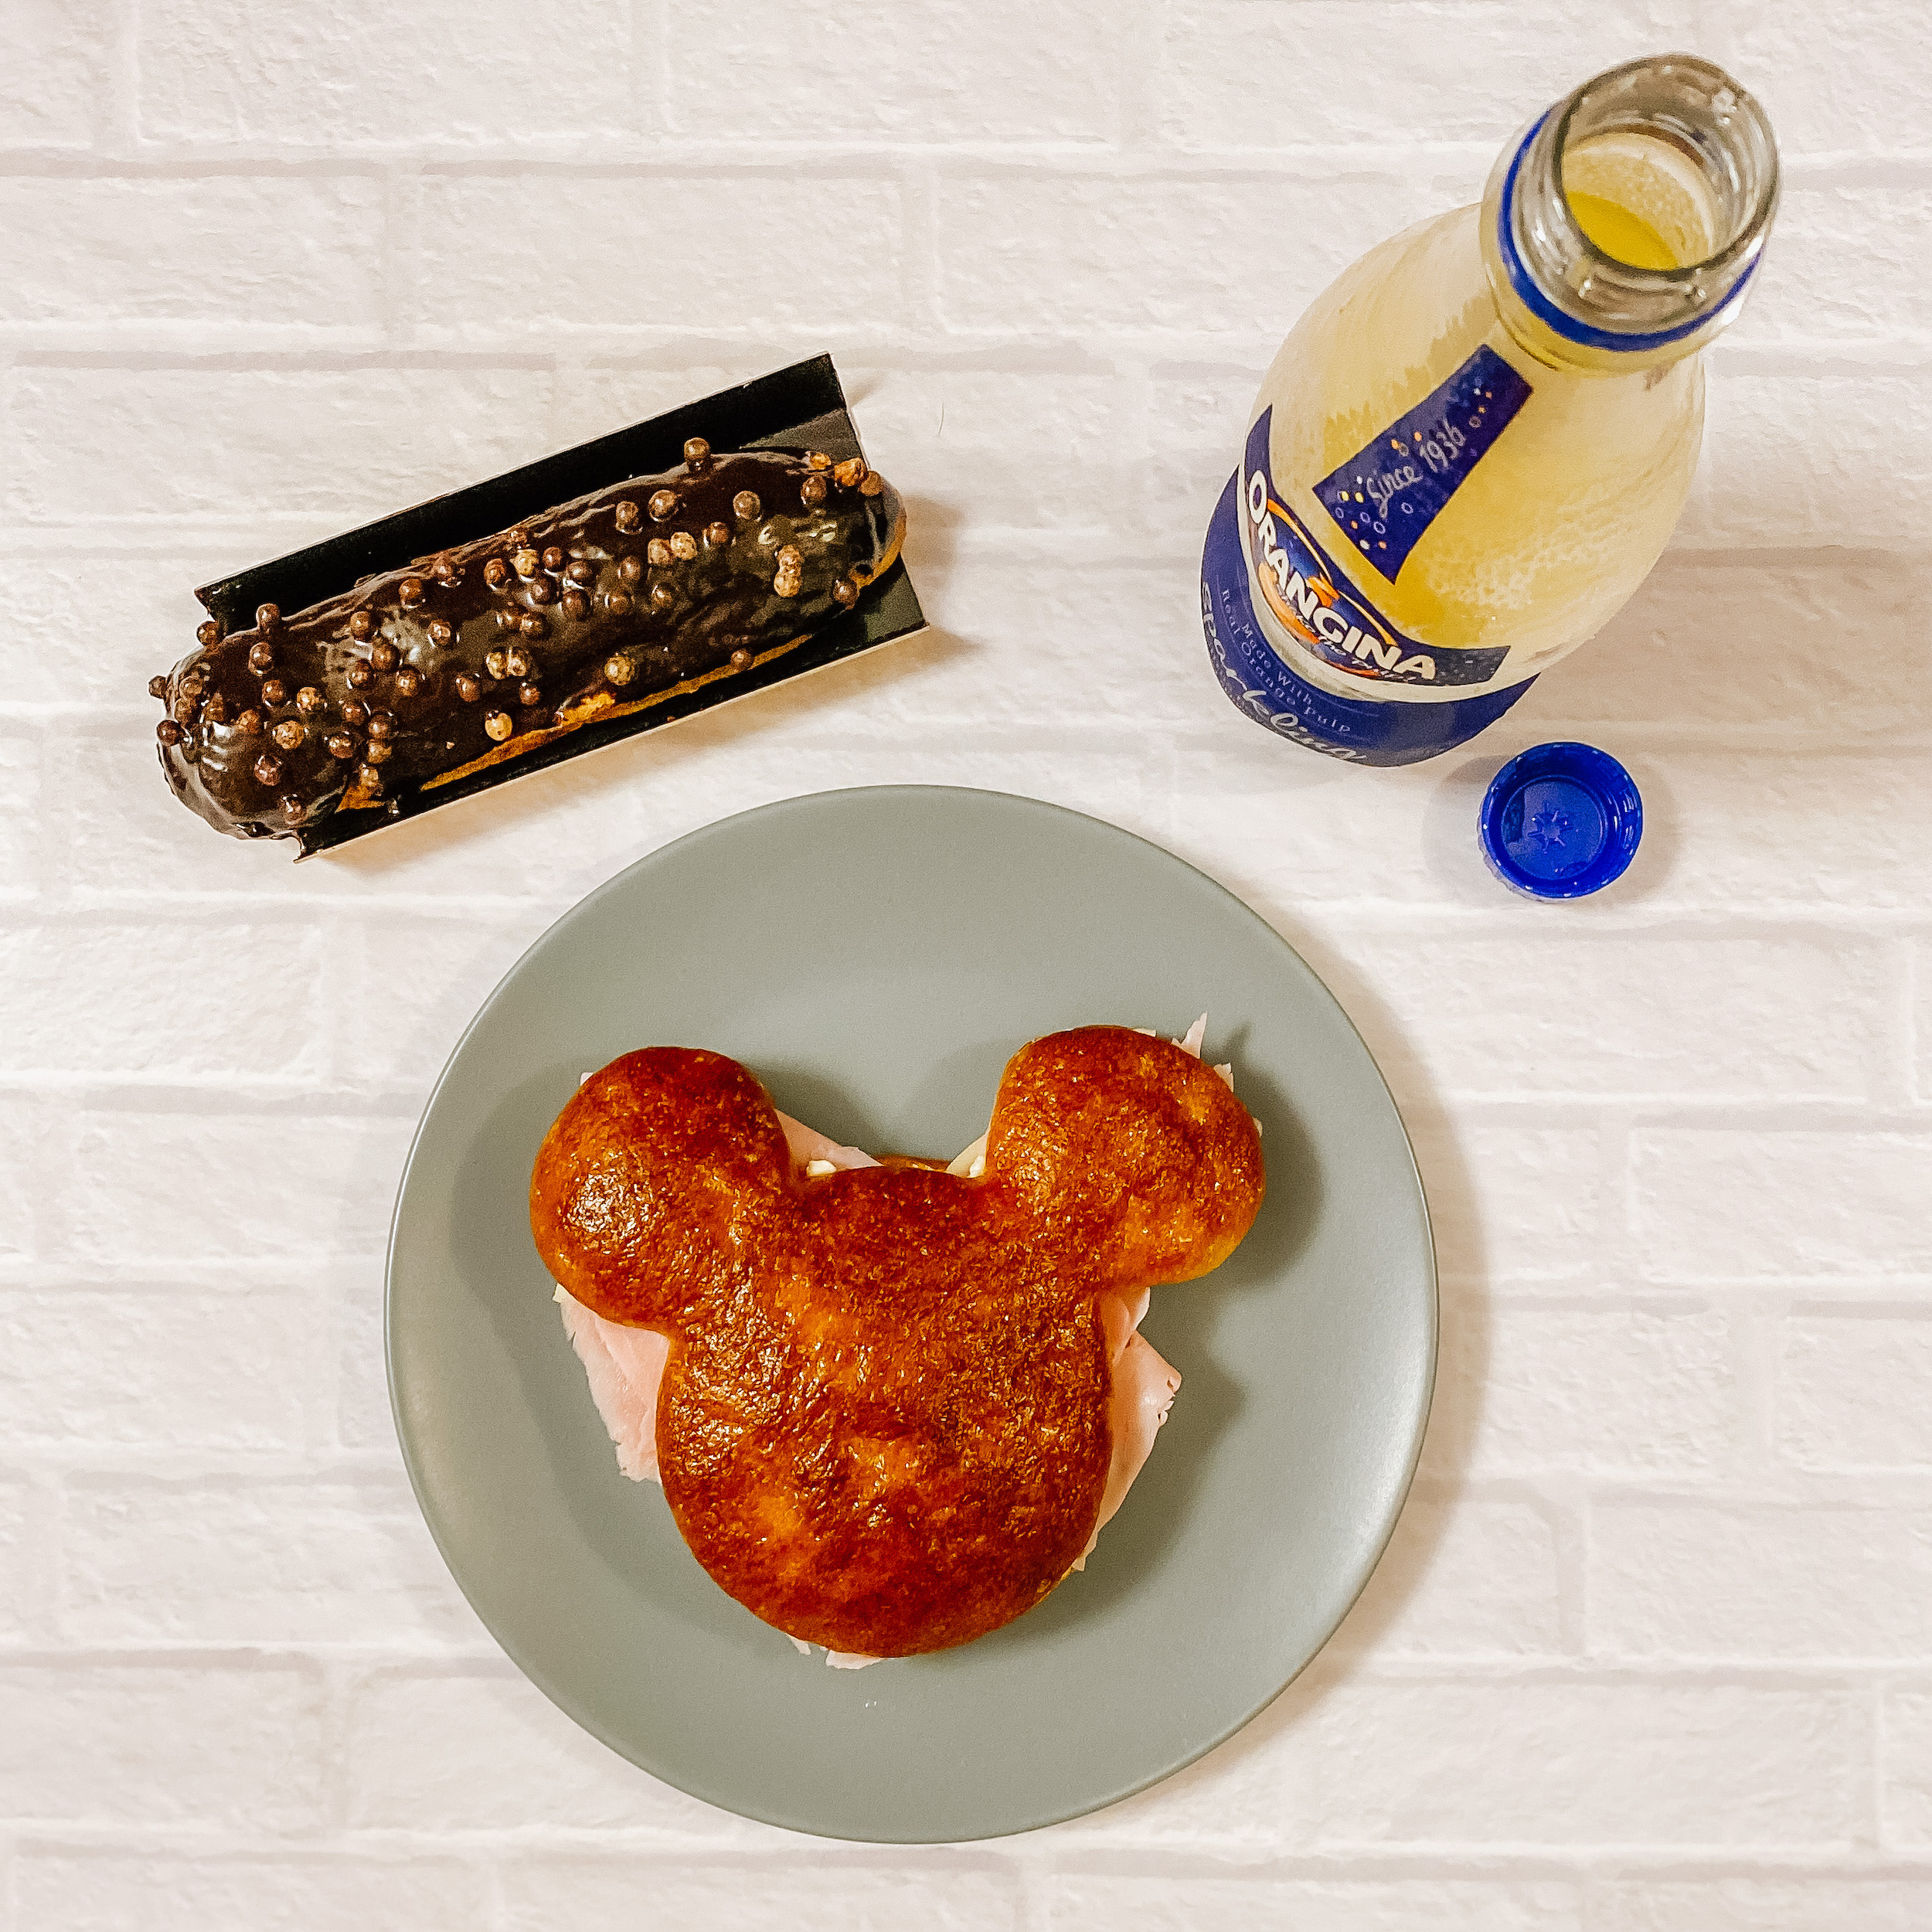 Celebration Mickey Sandwich on a plate, with an eclair, and a bottle of Orangina